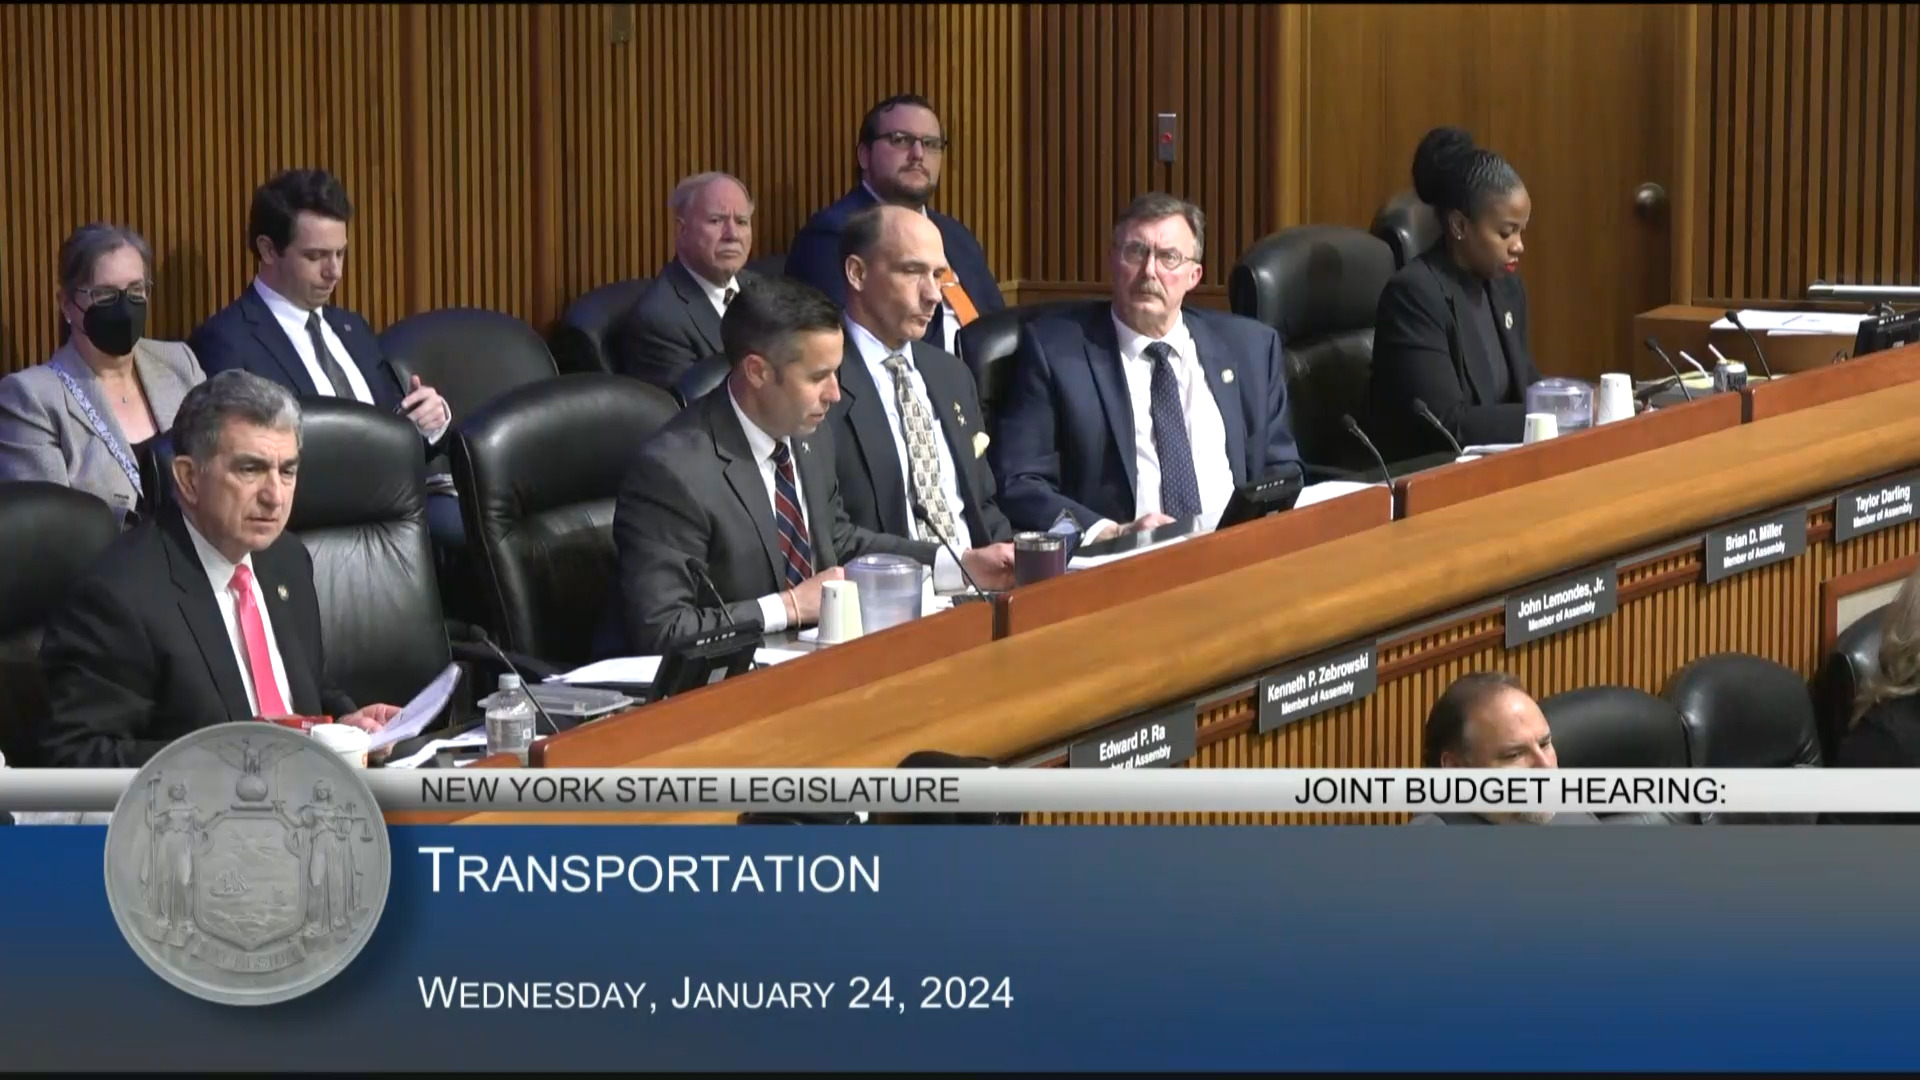 DOT Commissioner Testifies During Joint Budget Hearing on Transportation